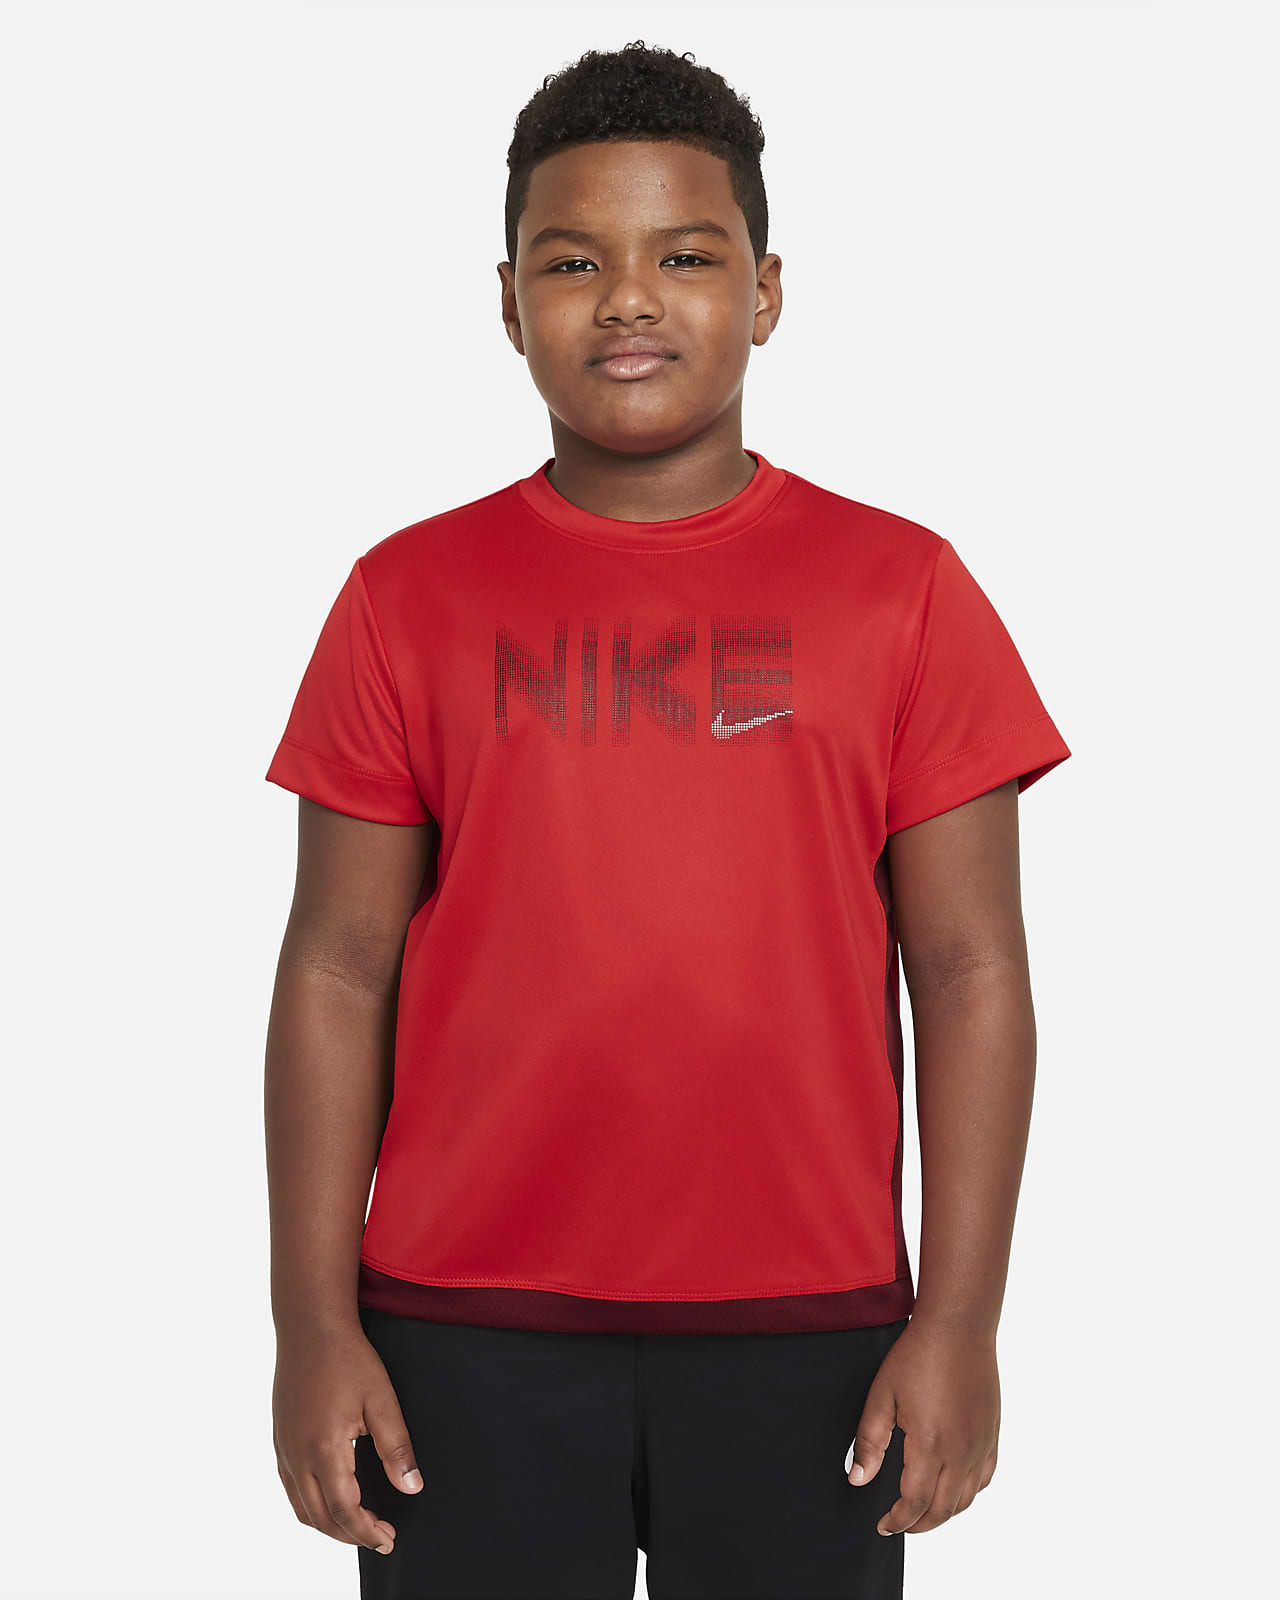 red nike training top